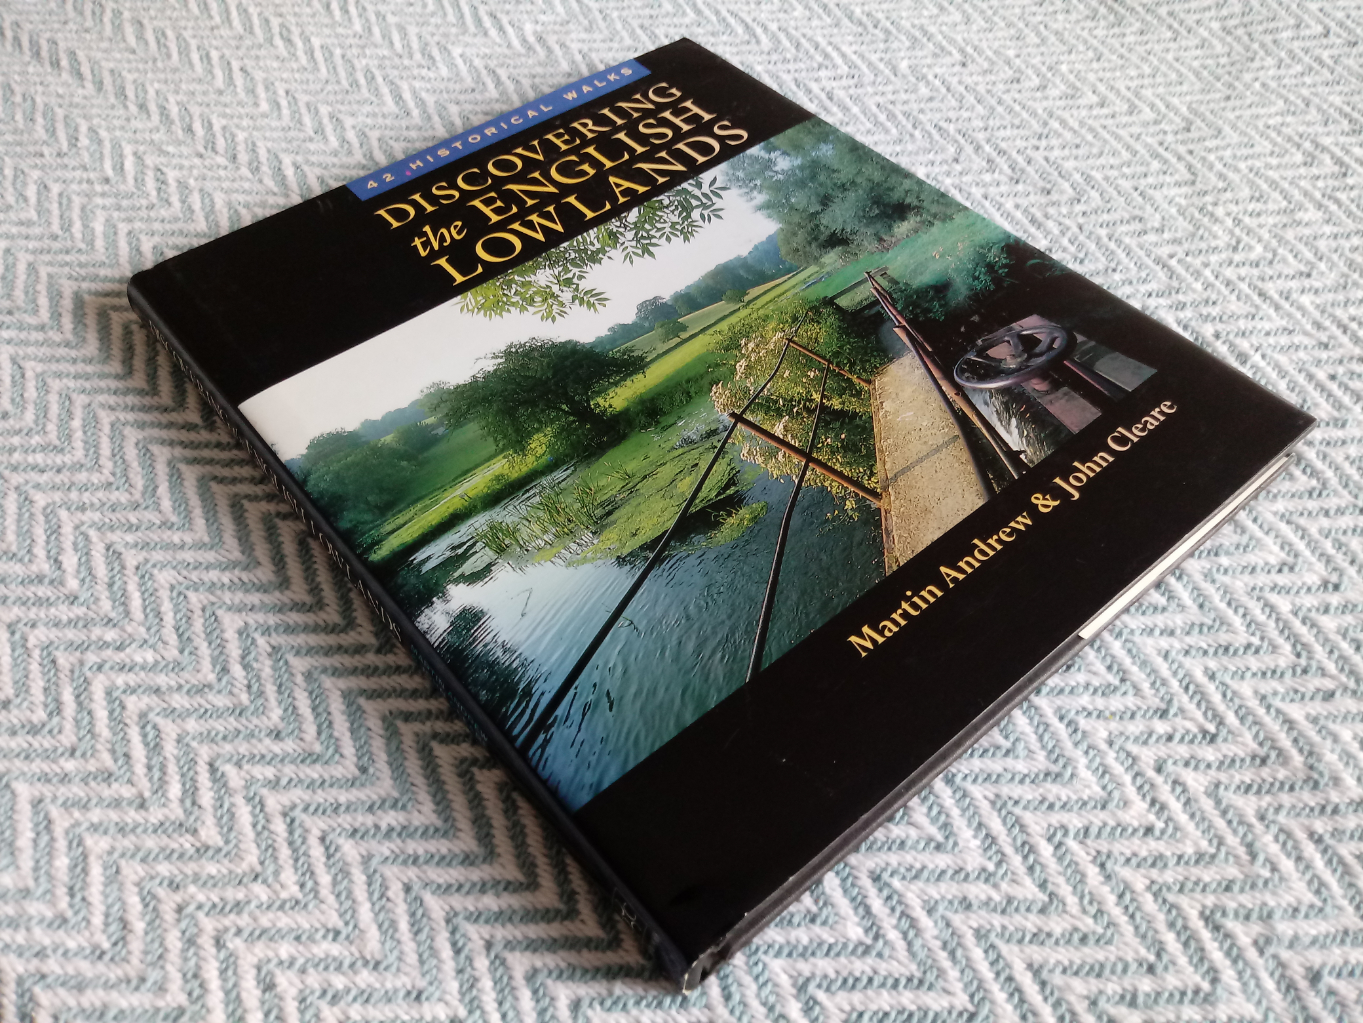 Discovering the English Lowlands 42 Historical Walks by Martin Andrew and John Cleare hardback